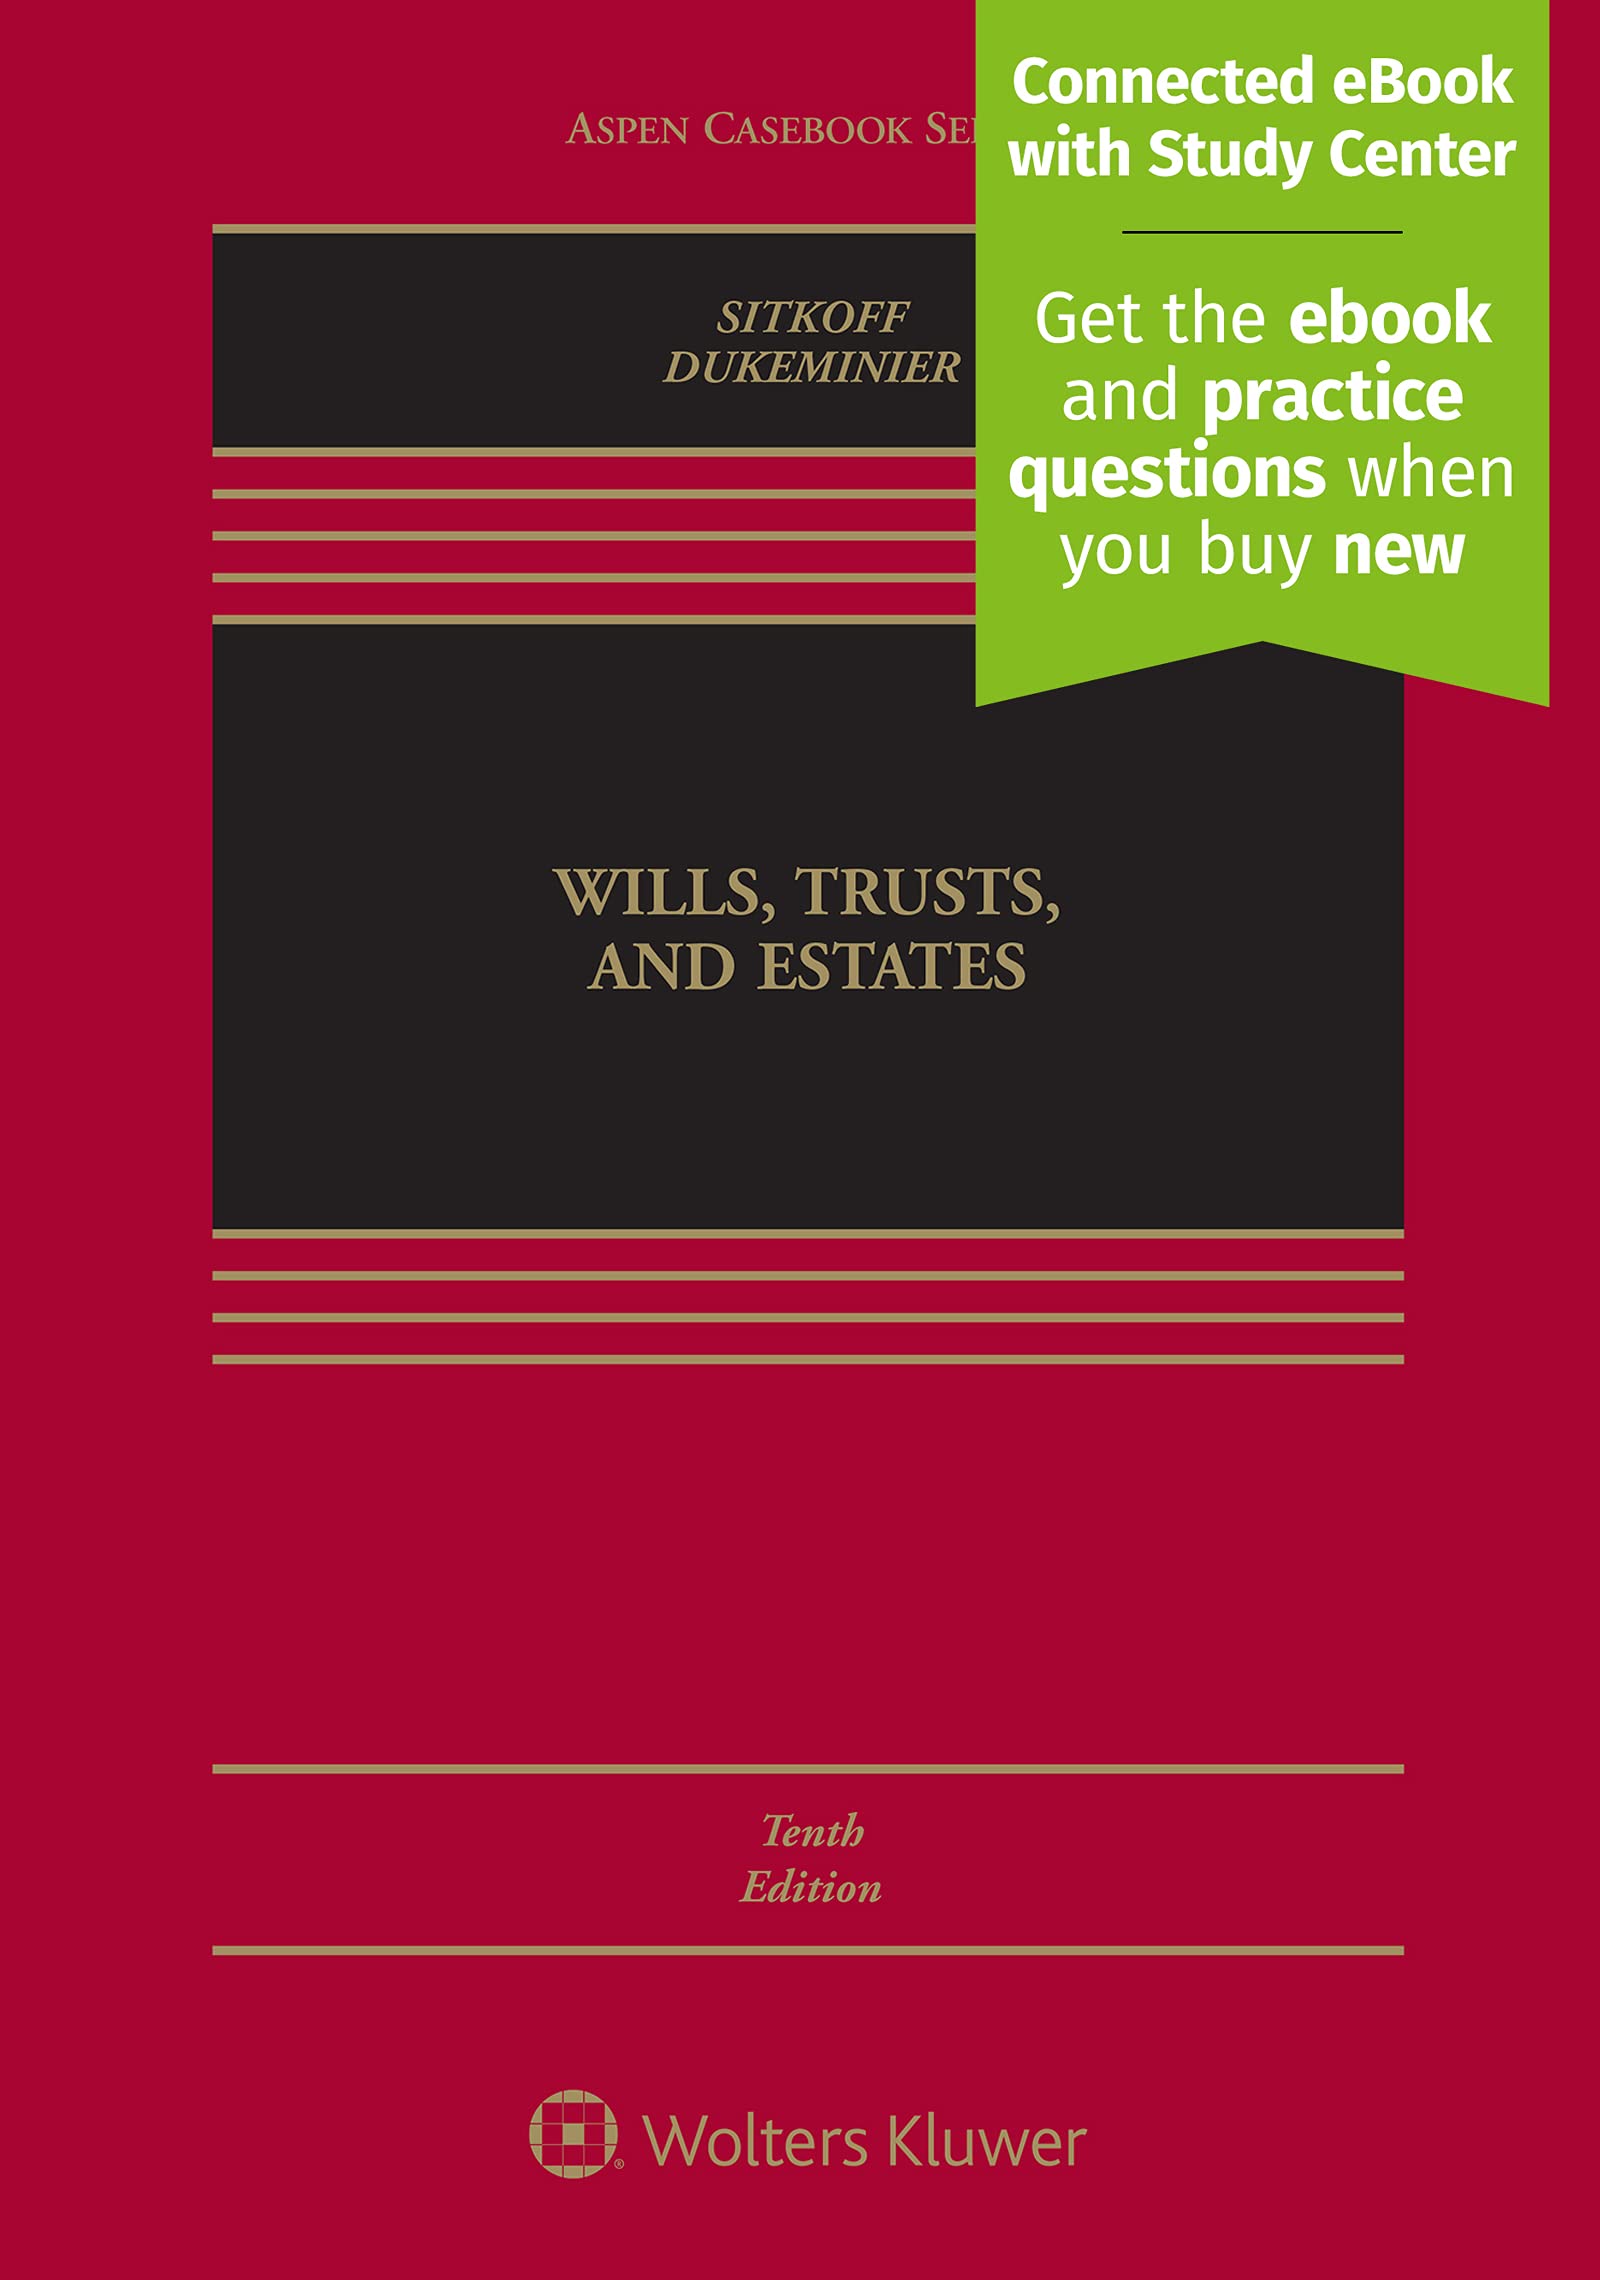 Book Cover Wills, Trusts, and Estates, Tenth Edition [Connected eBook with Study Center] (Aspen Casebook)